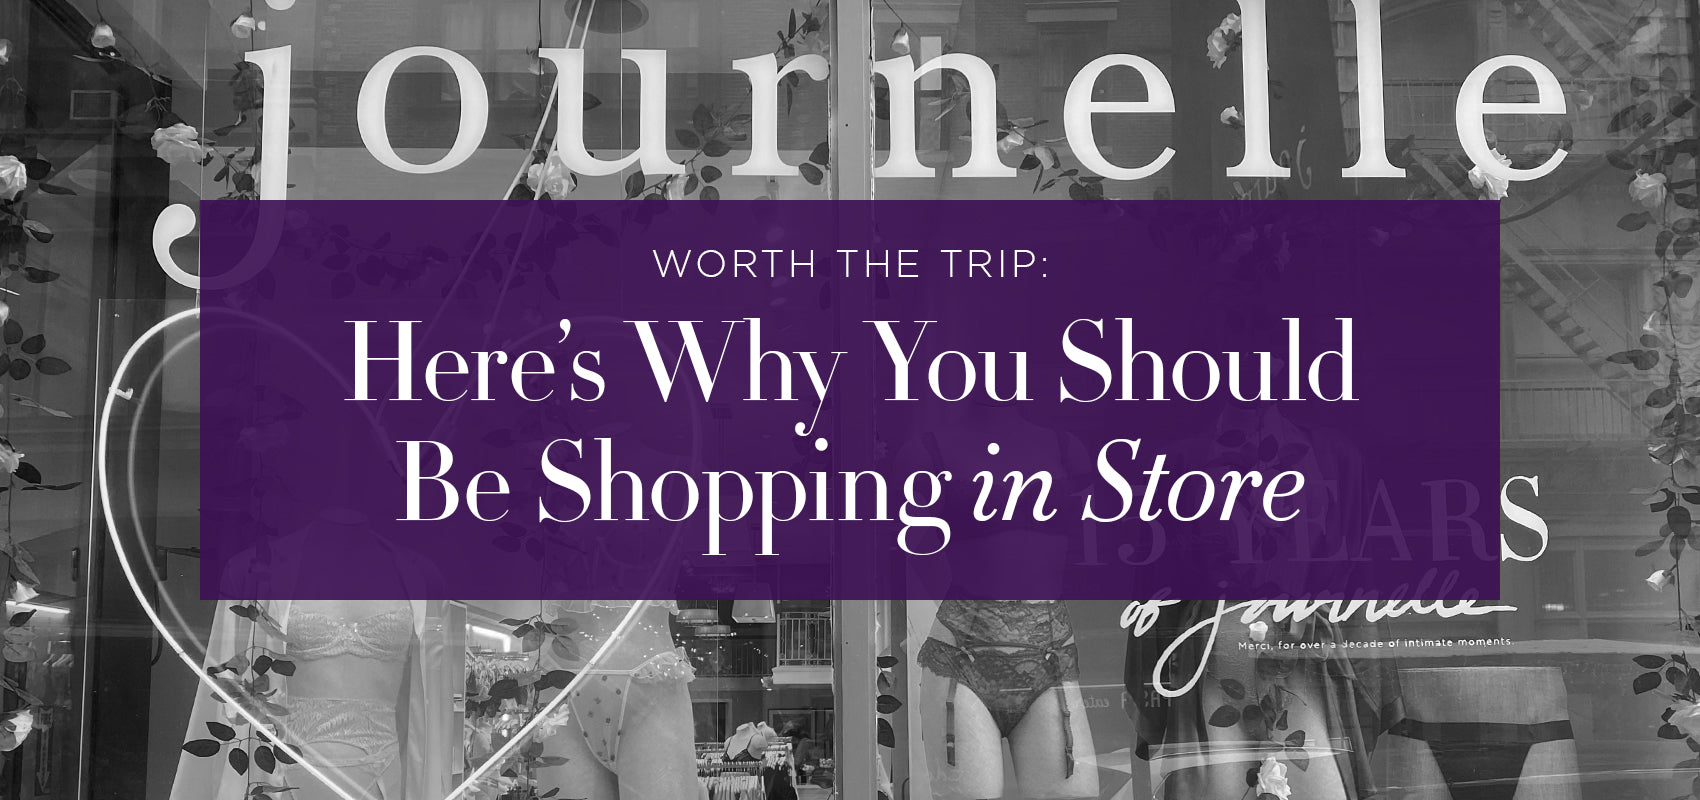 Worth the Trip: Here’s Why You Should Be Shopping in Store